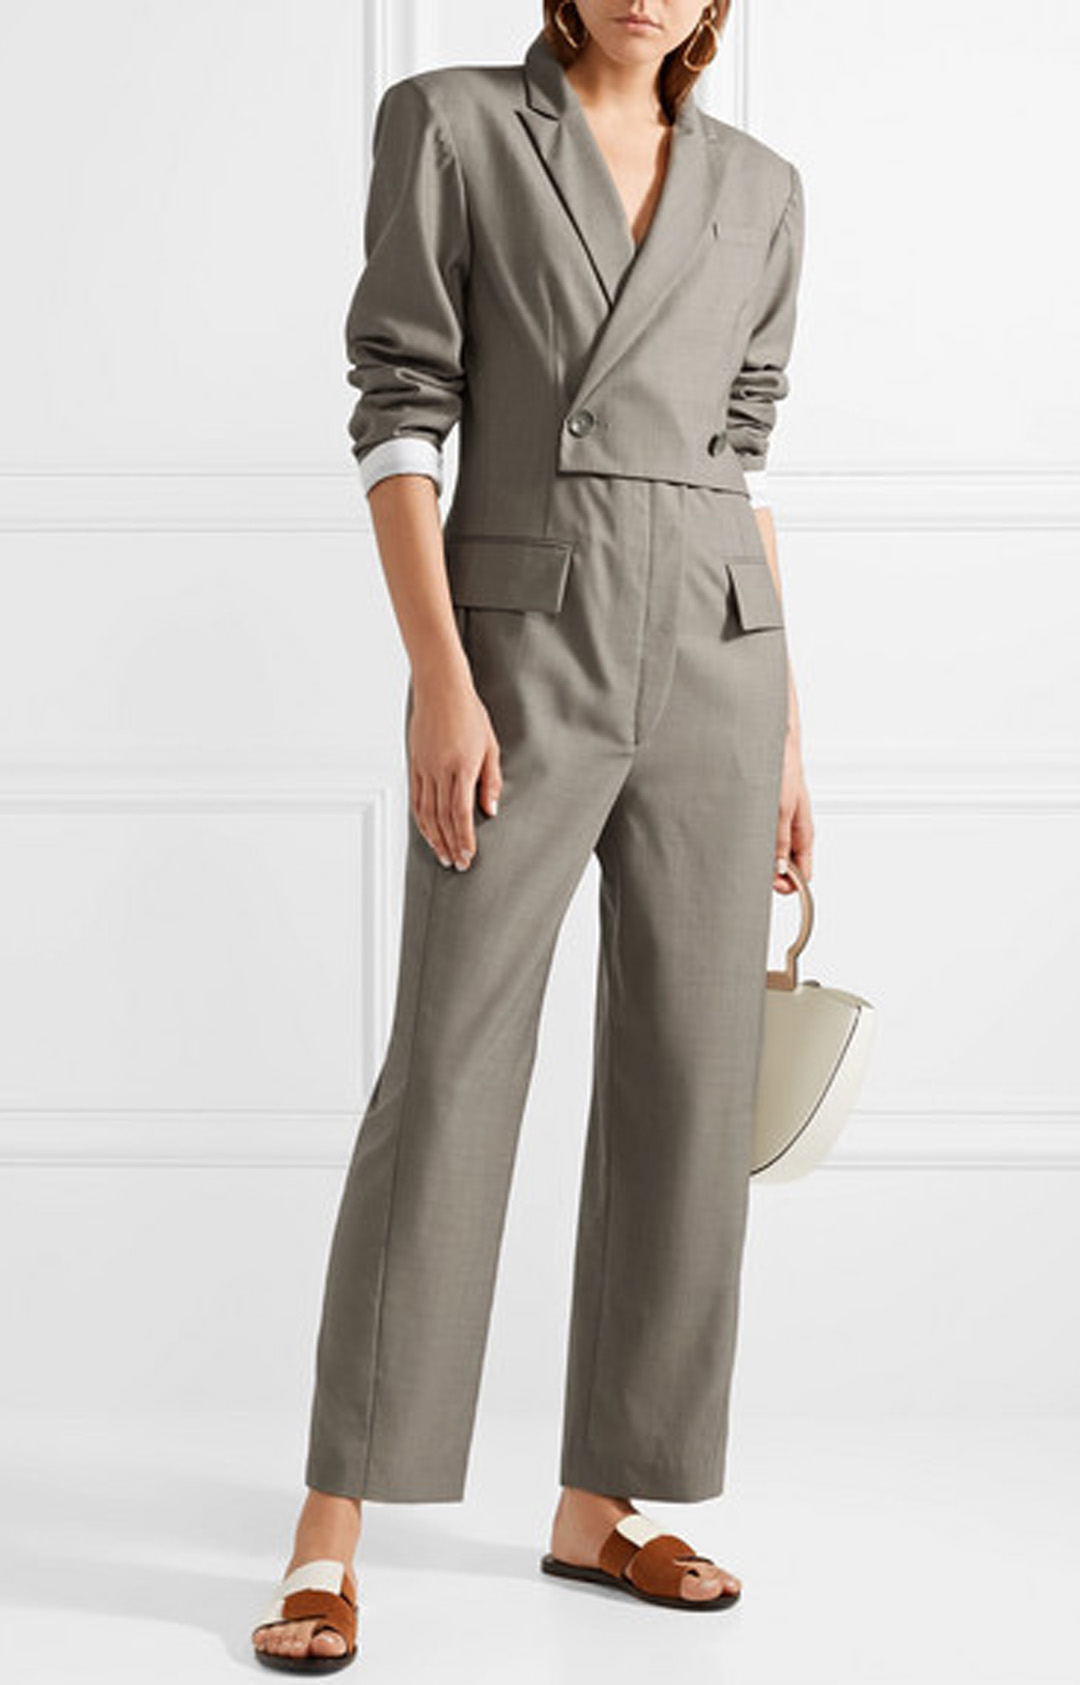 Tibi Double-breasted jumpsuit, $1,433 USD from Net-a-Porter